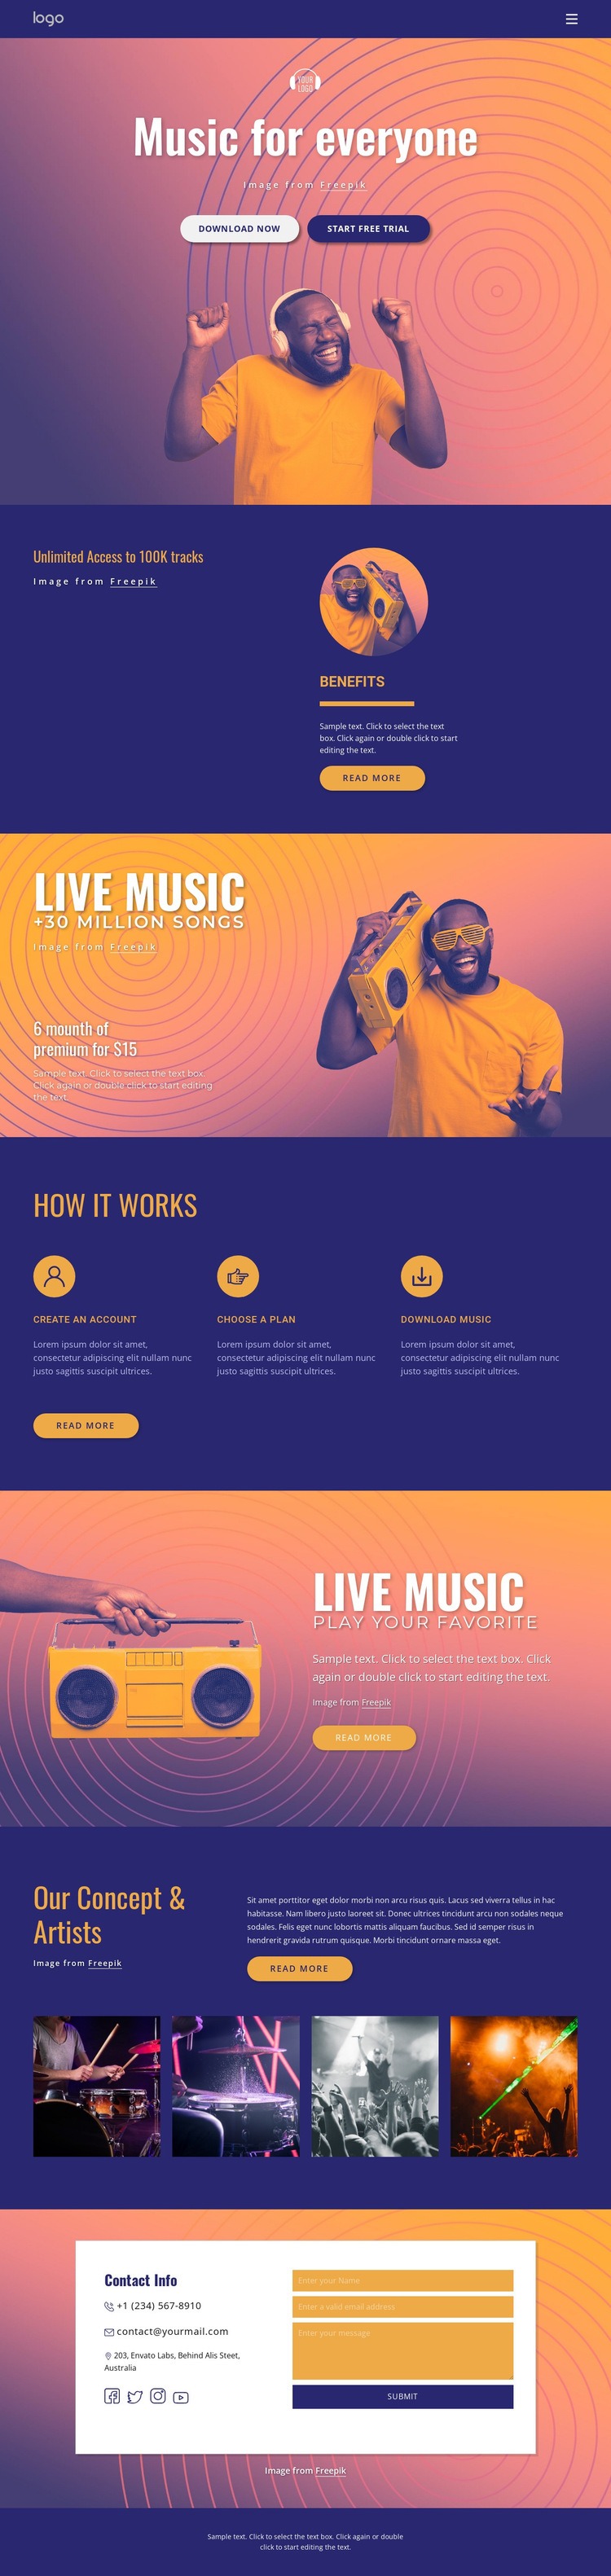 Music for everyone Web Page Design